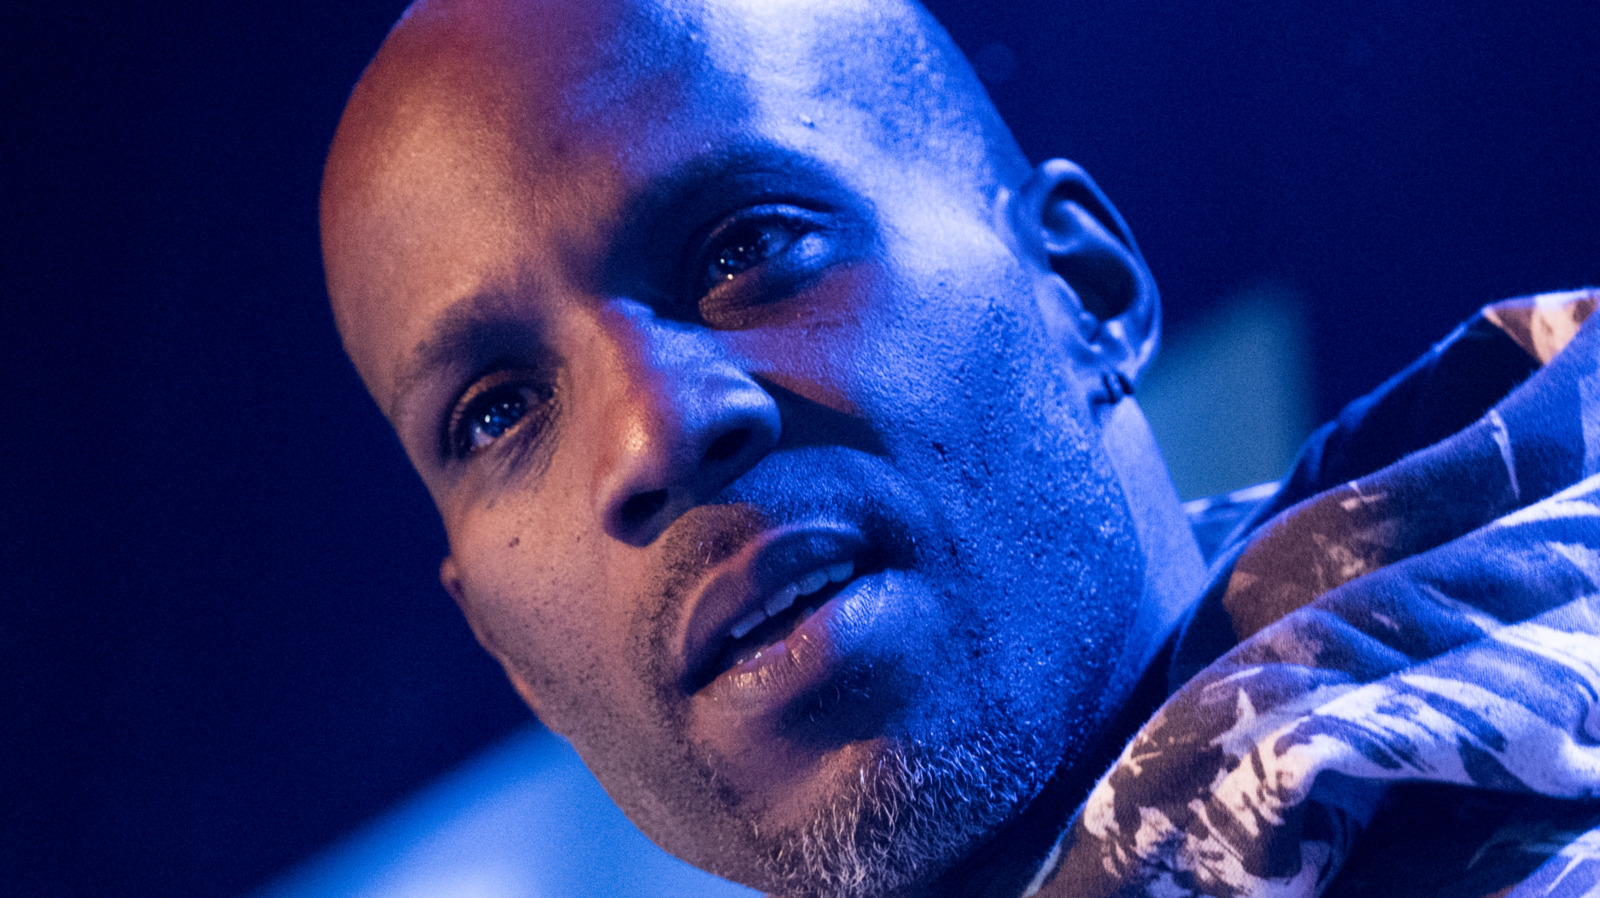 What happened to DMX and how did he die?